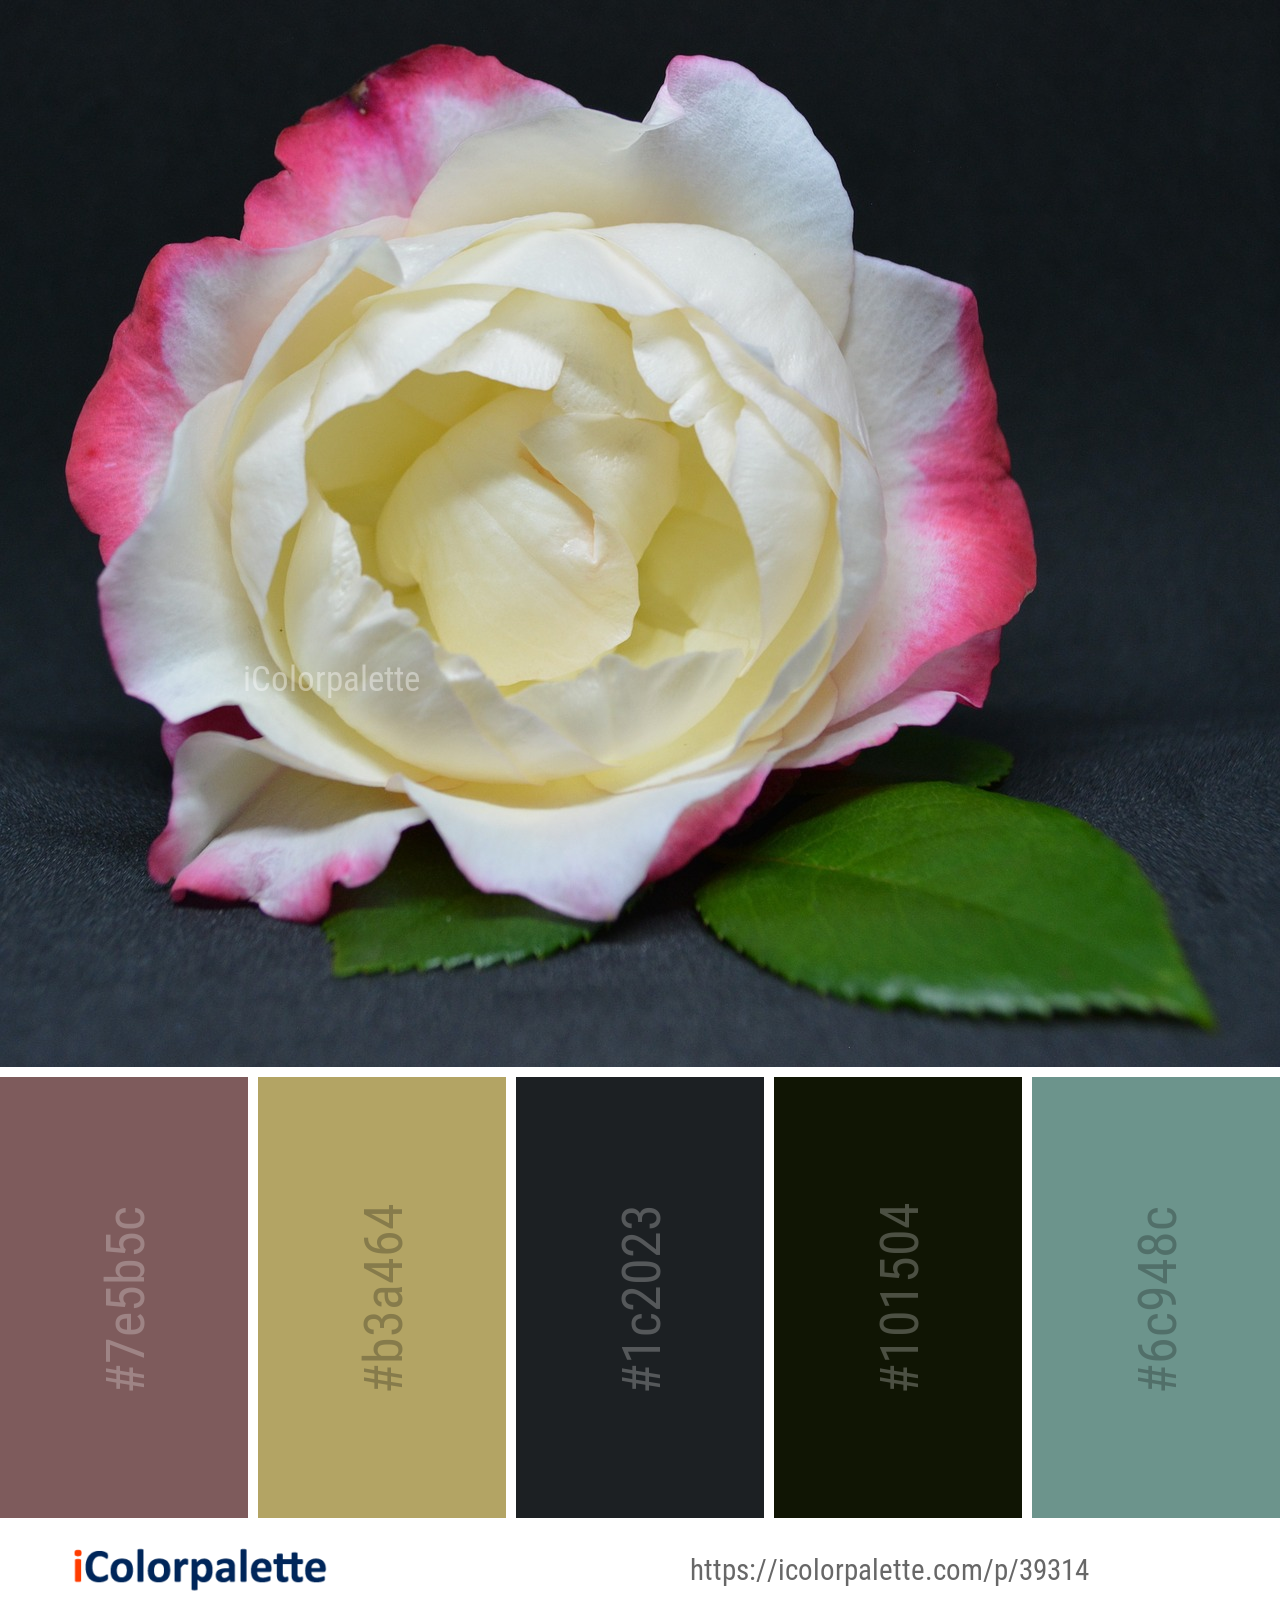 Color Palette Ideas from Flower Rose Family Image